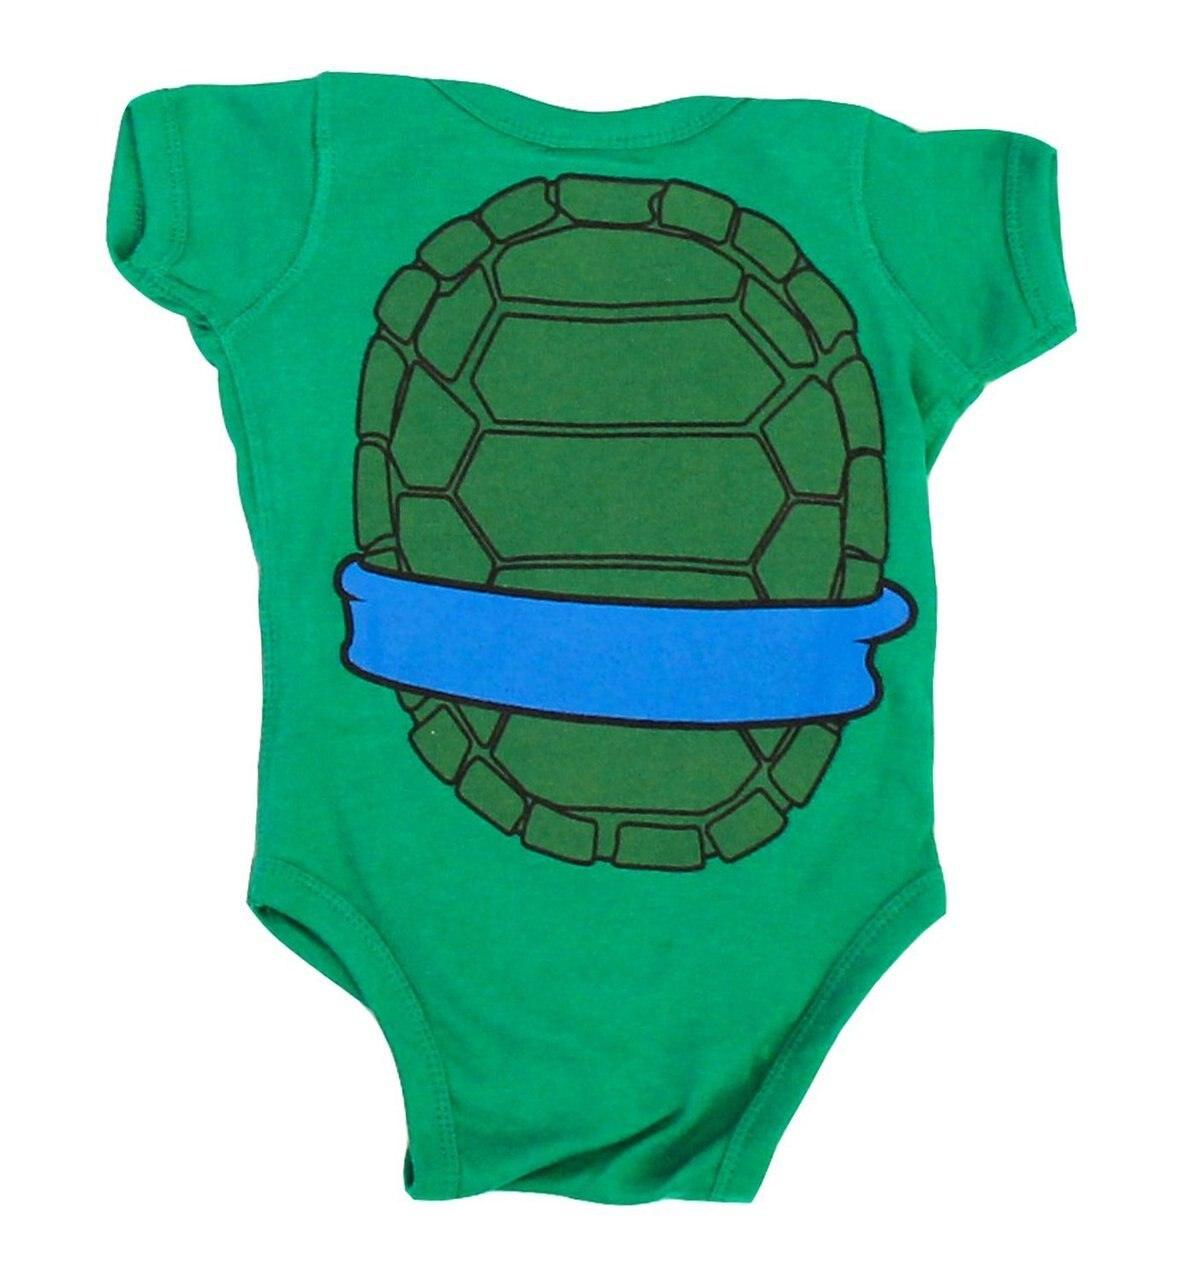  Teenage Mutant Ninja Turtles Toddler Boys 3 Piece Outfit Set: T- Shirt Tank Top Shorts 2T : Clothing, Shoes & Jewelry